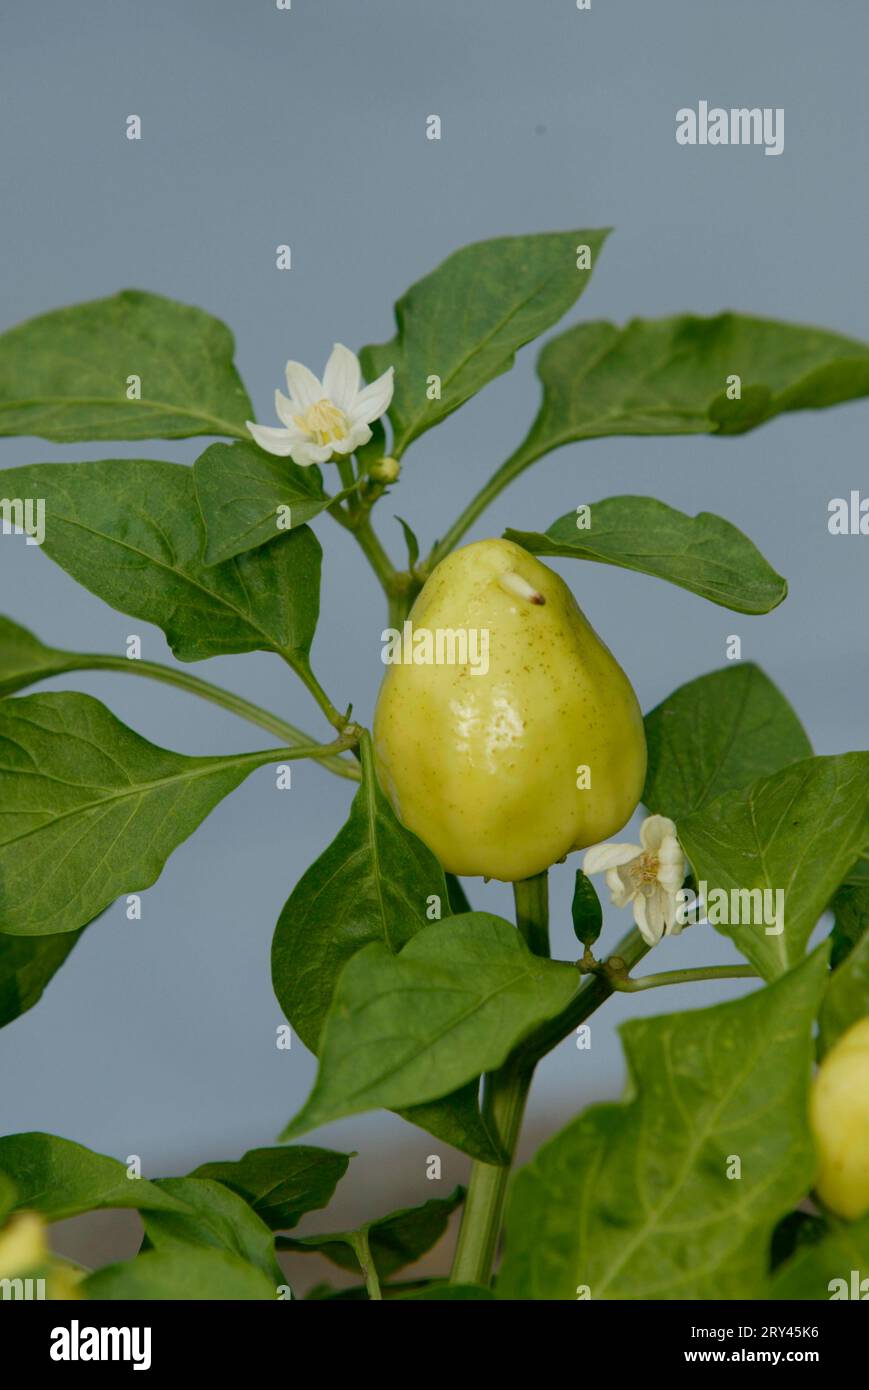 Peppers (Capsicum annuum), Flower and fruit, Flowers and fruit, Vegetables, Crops, Solanaceae, Fruits, Vertical, Flowering Stock Photo